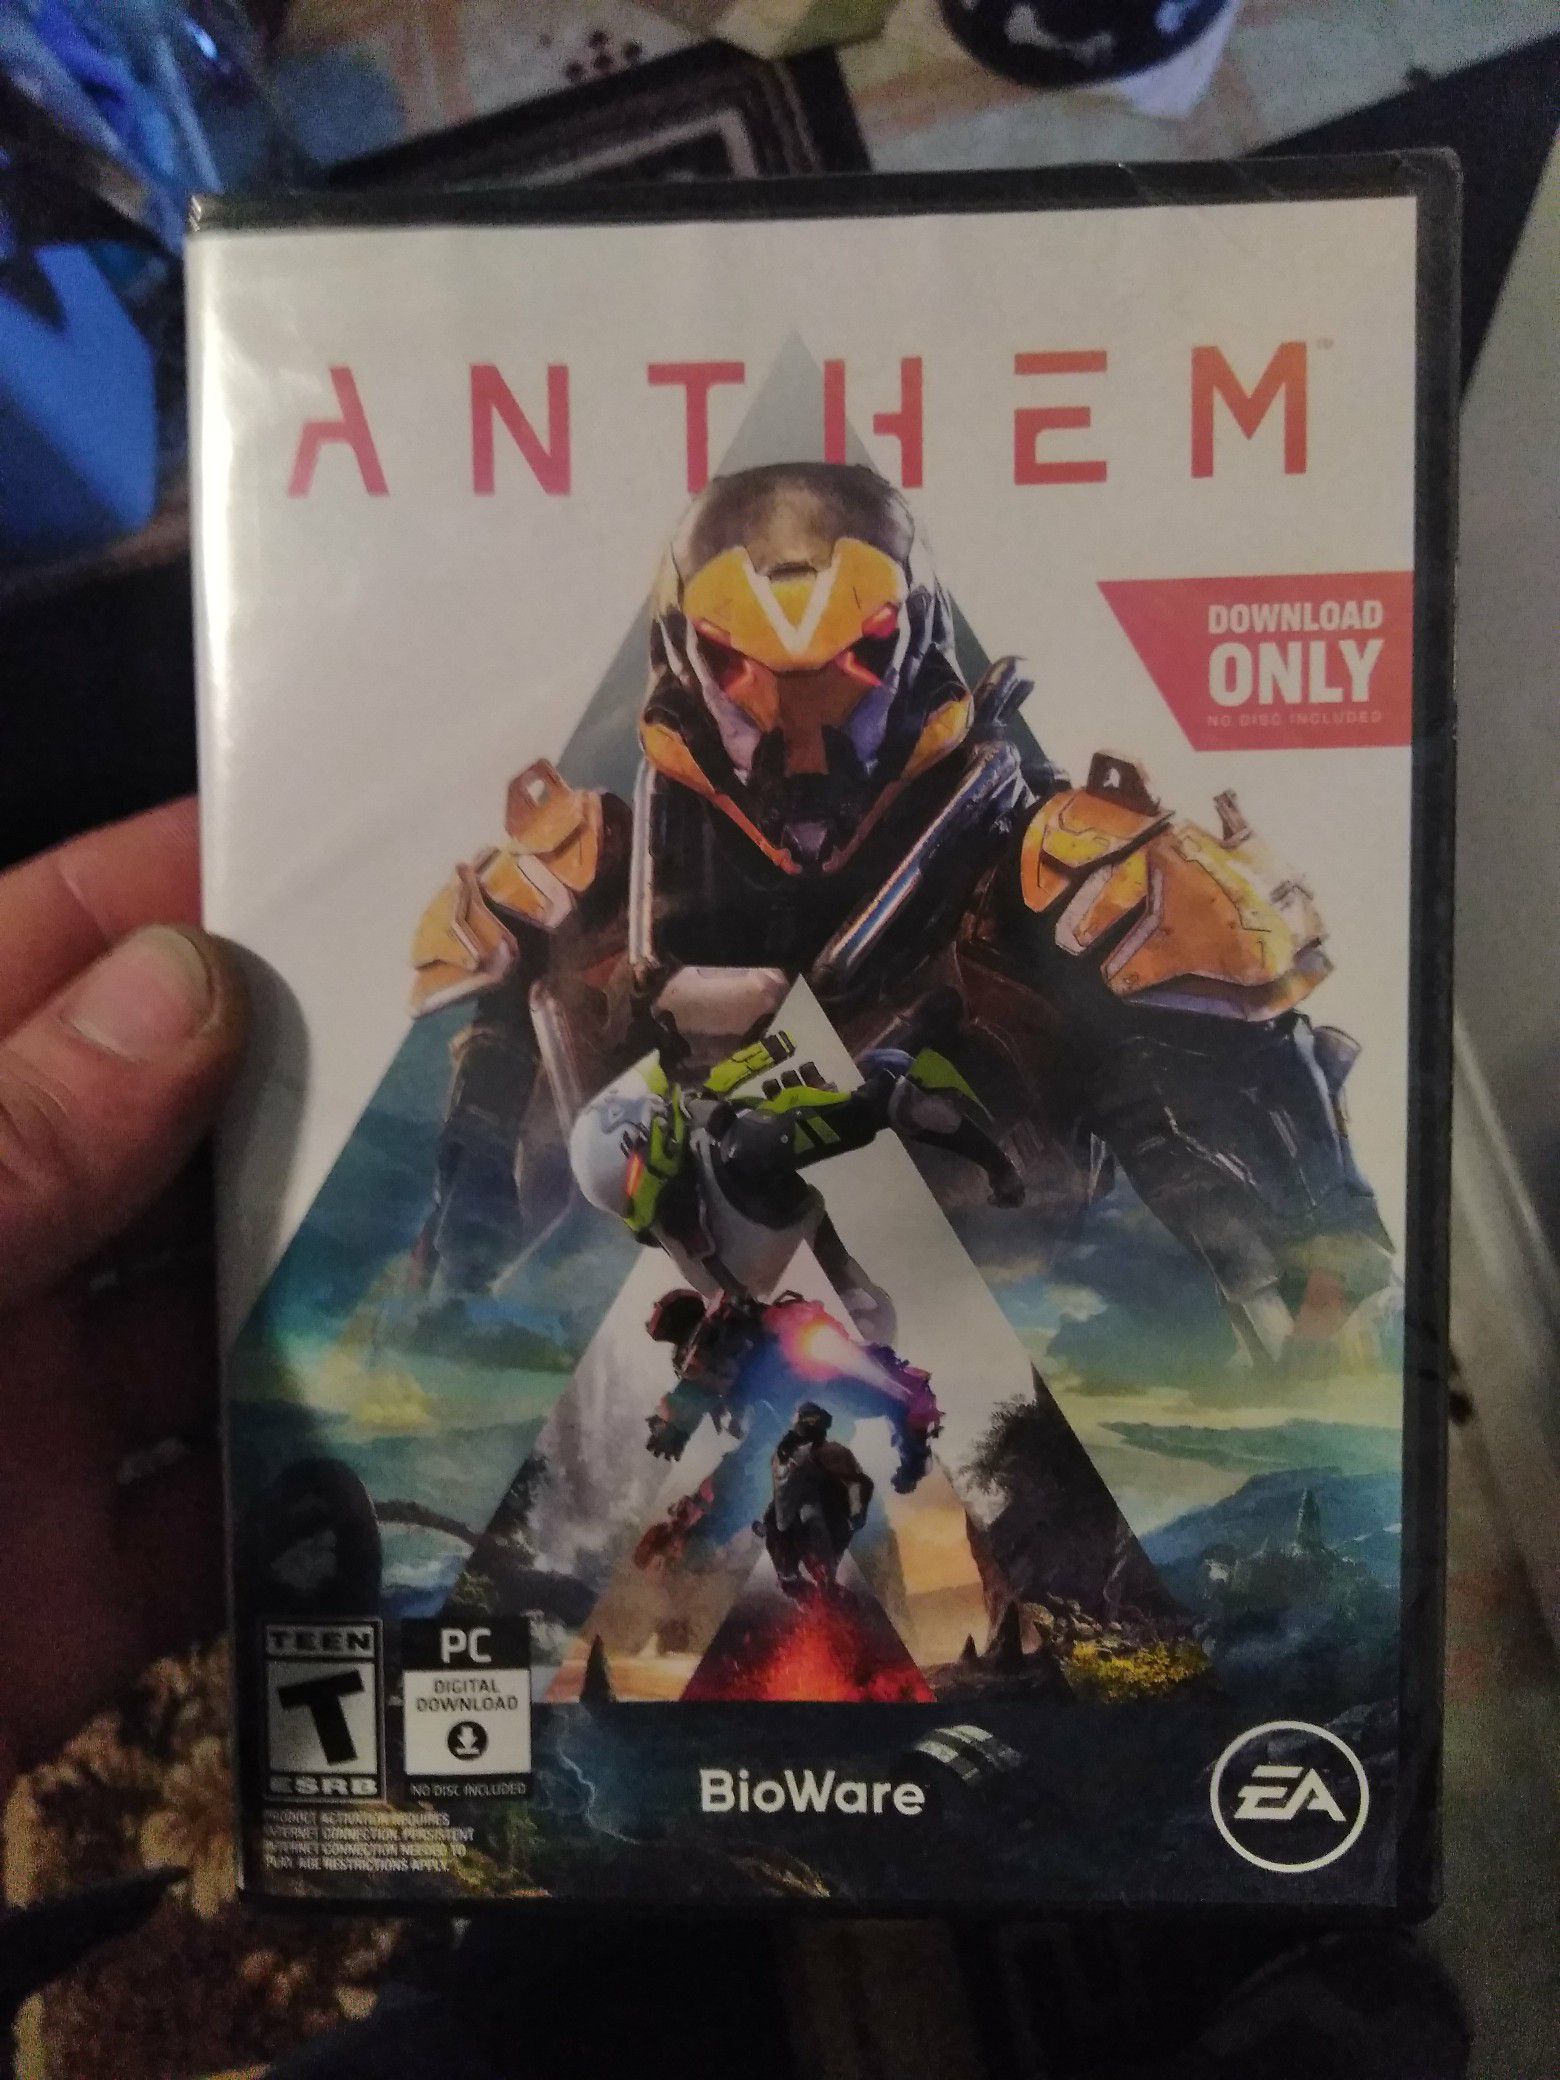 Anthem for PC never opened